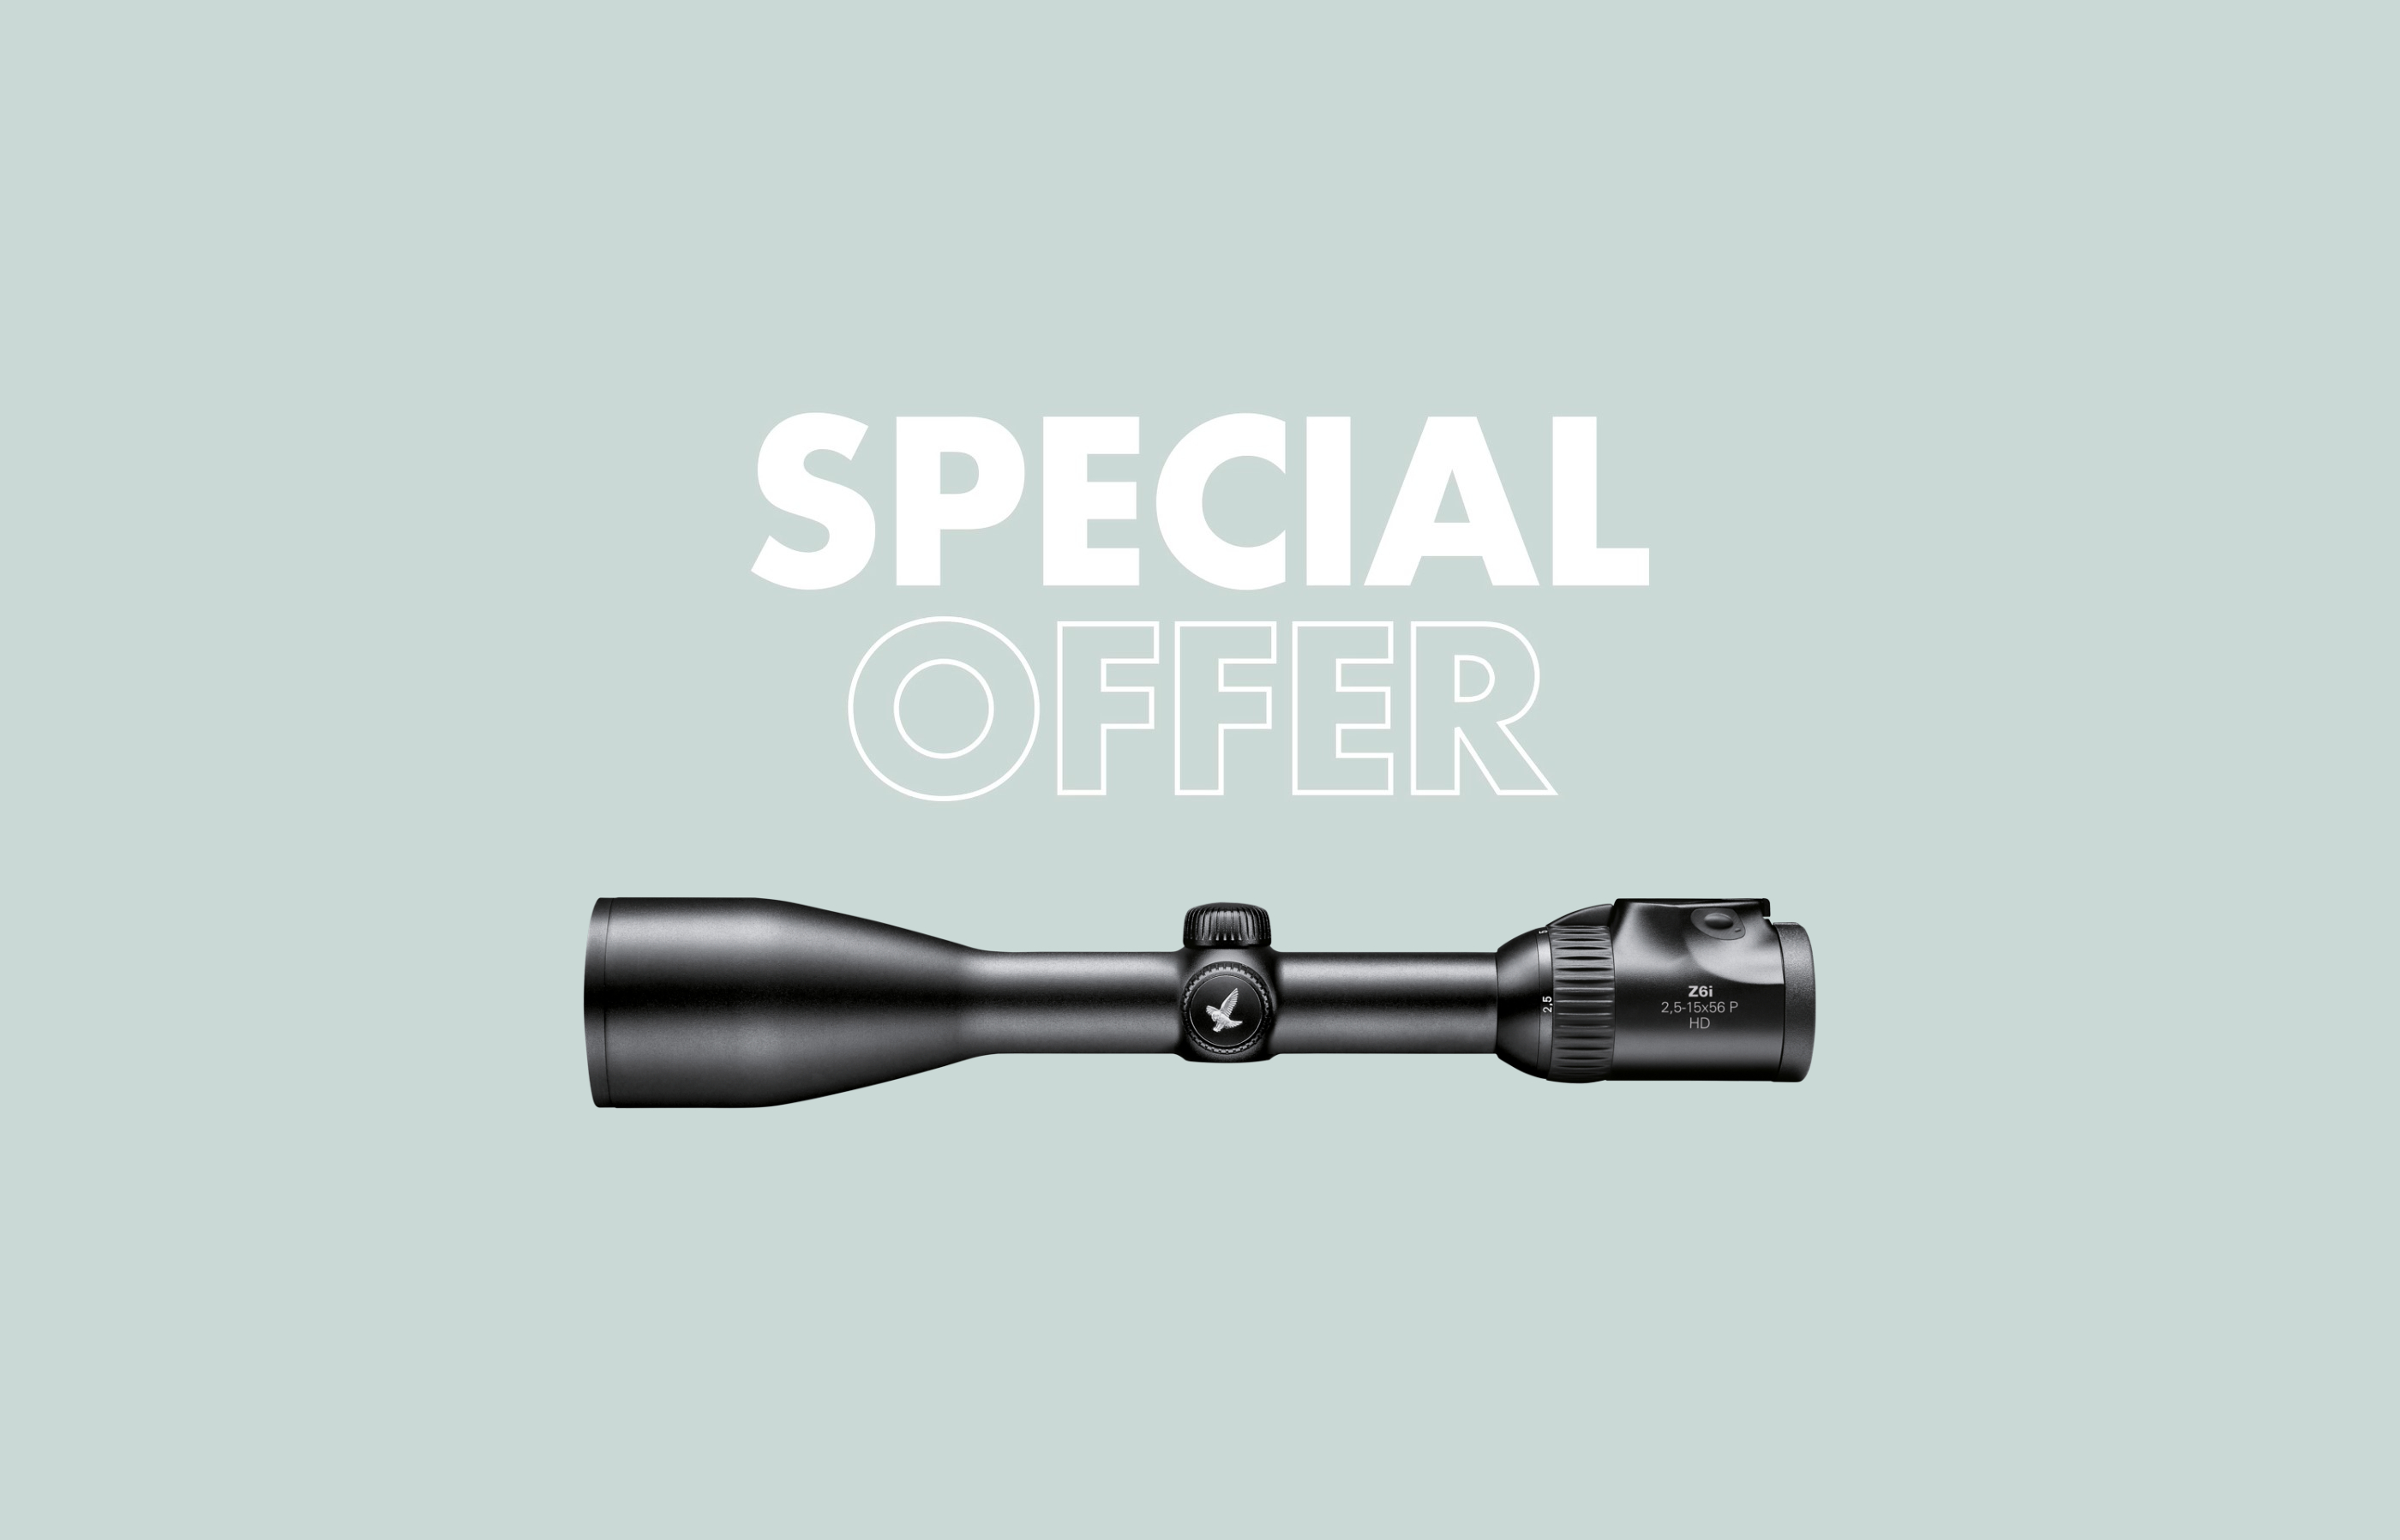 SWAROVSKI OPTIK rifle scope promotion Z6i. Buy a new Z6i riflescope at a local retailer until September 30 and choose a matching accessory for free.